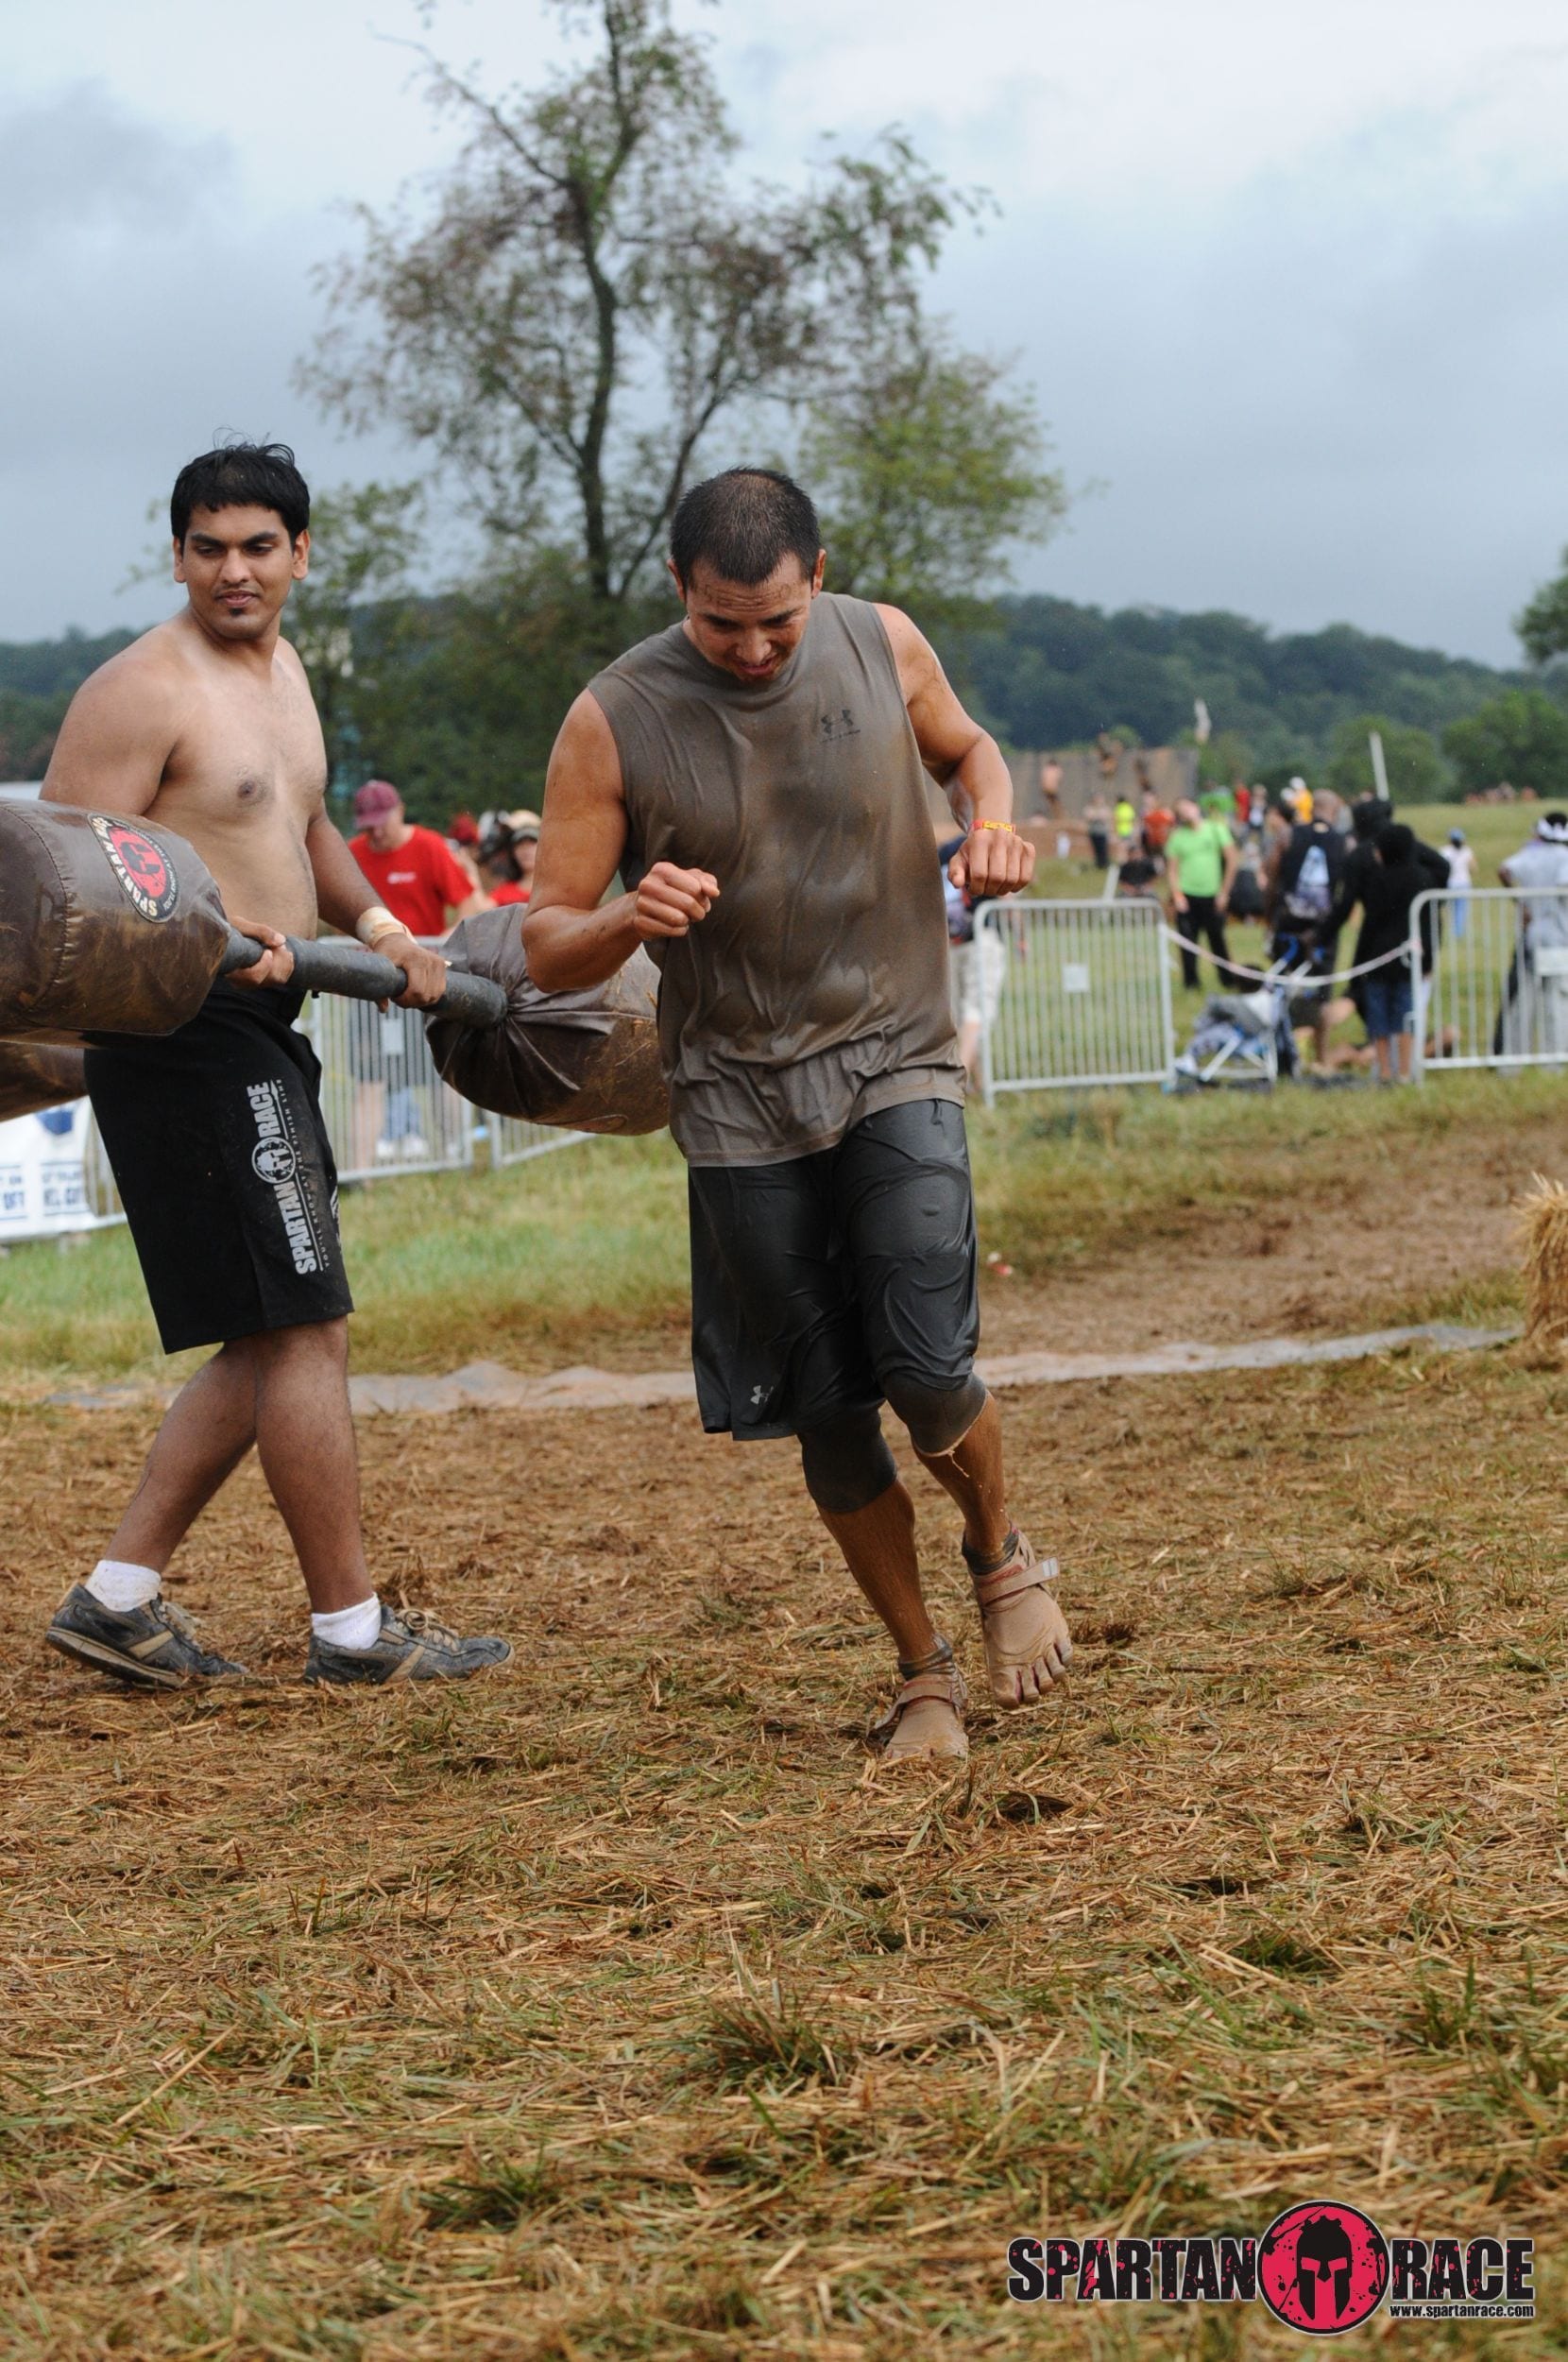 10 Things I learned from Running the Spartan Mud/Obstacle Race